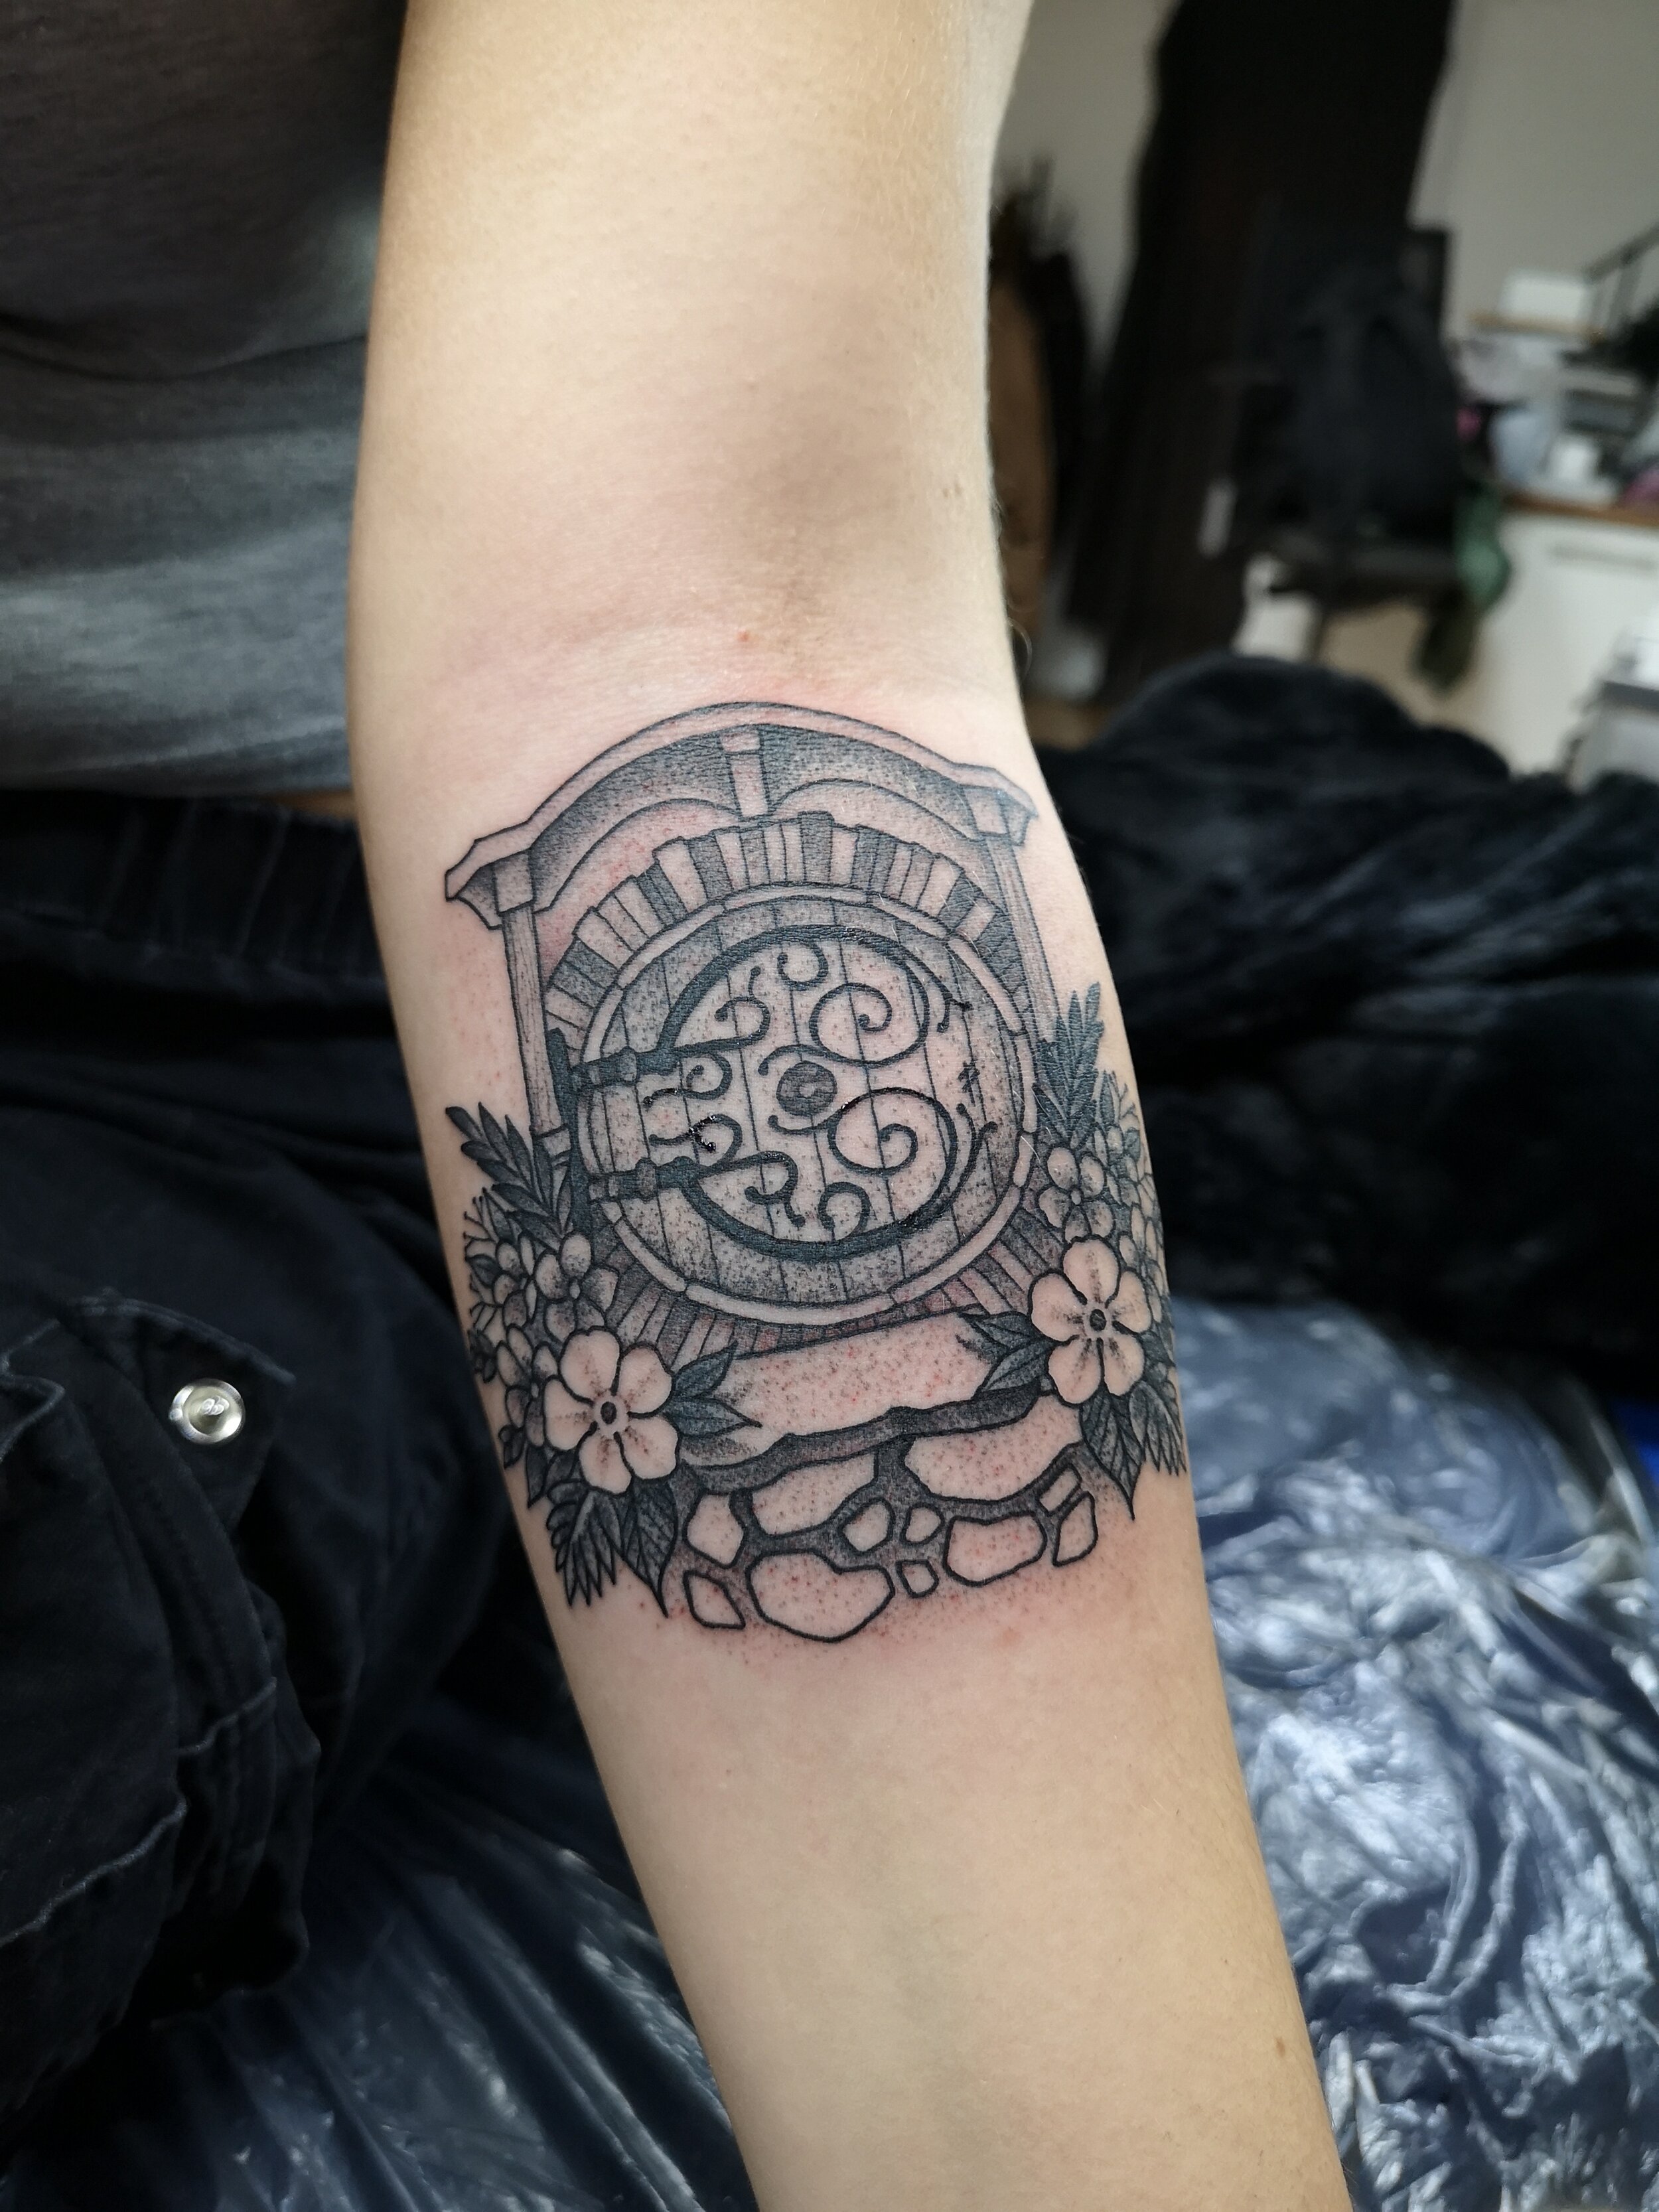 Tattoo Time - My First Backpacking Tattoo | Backpacker Banter